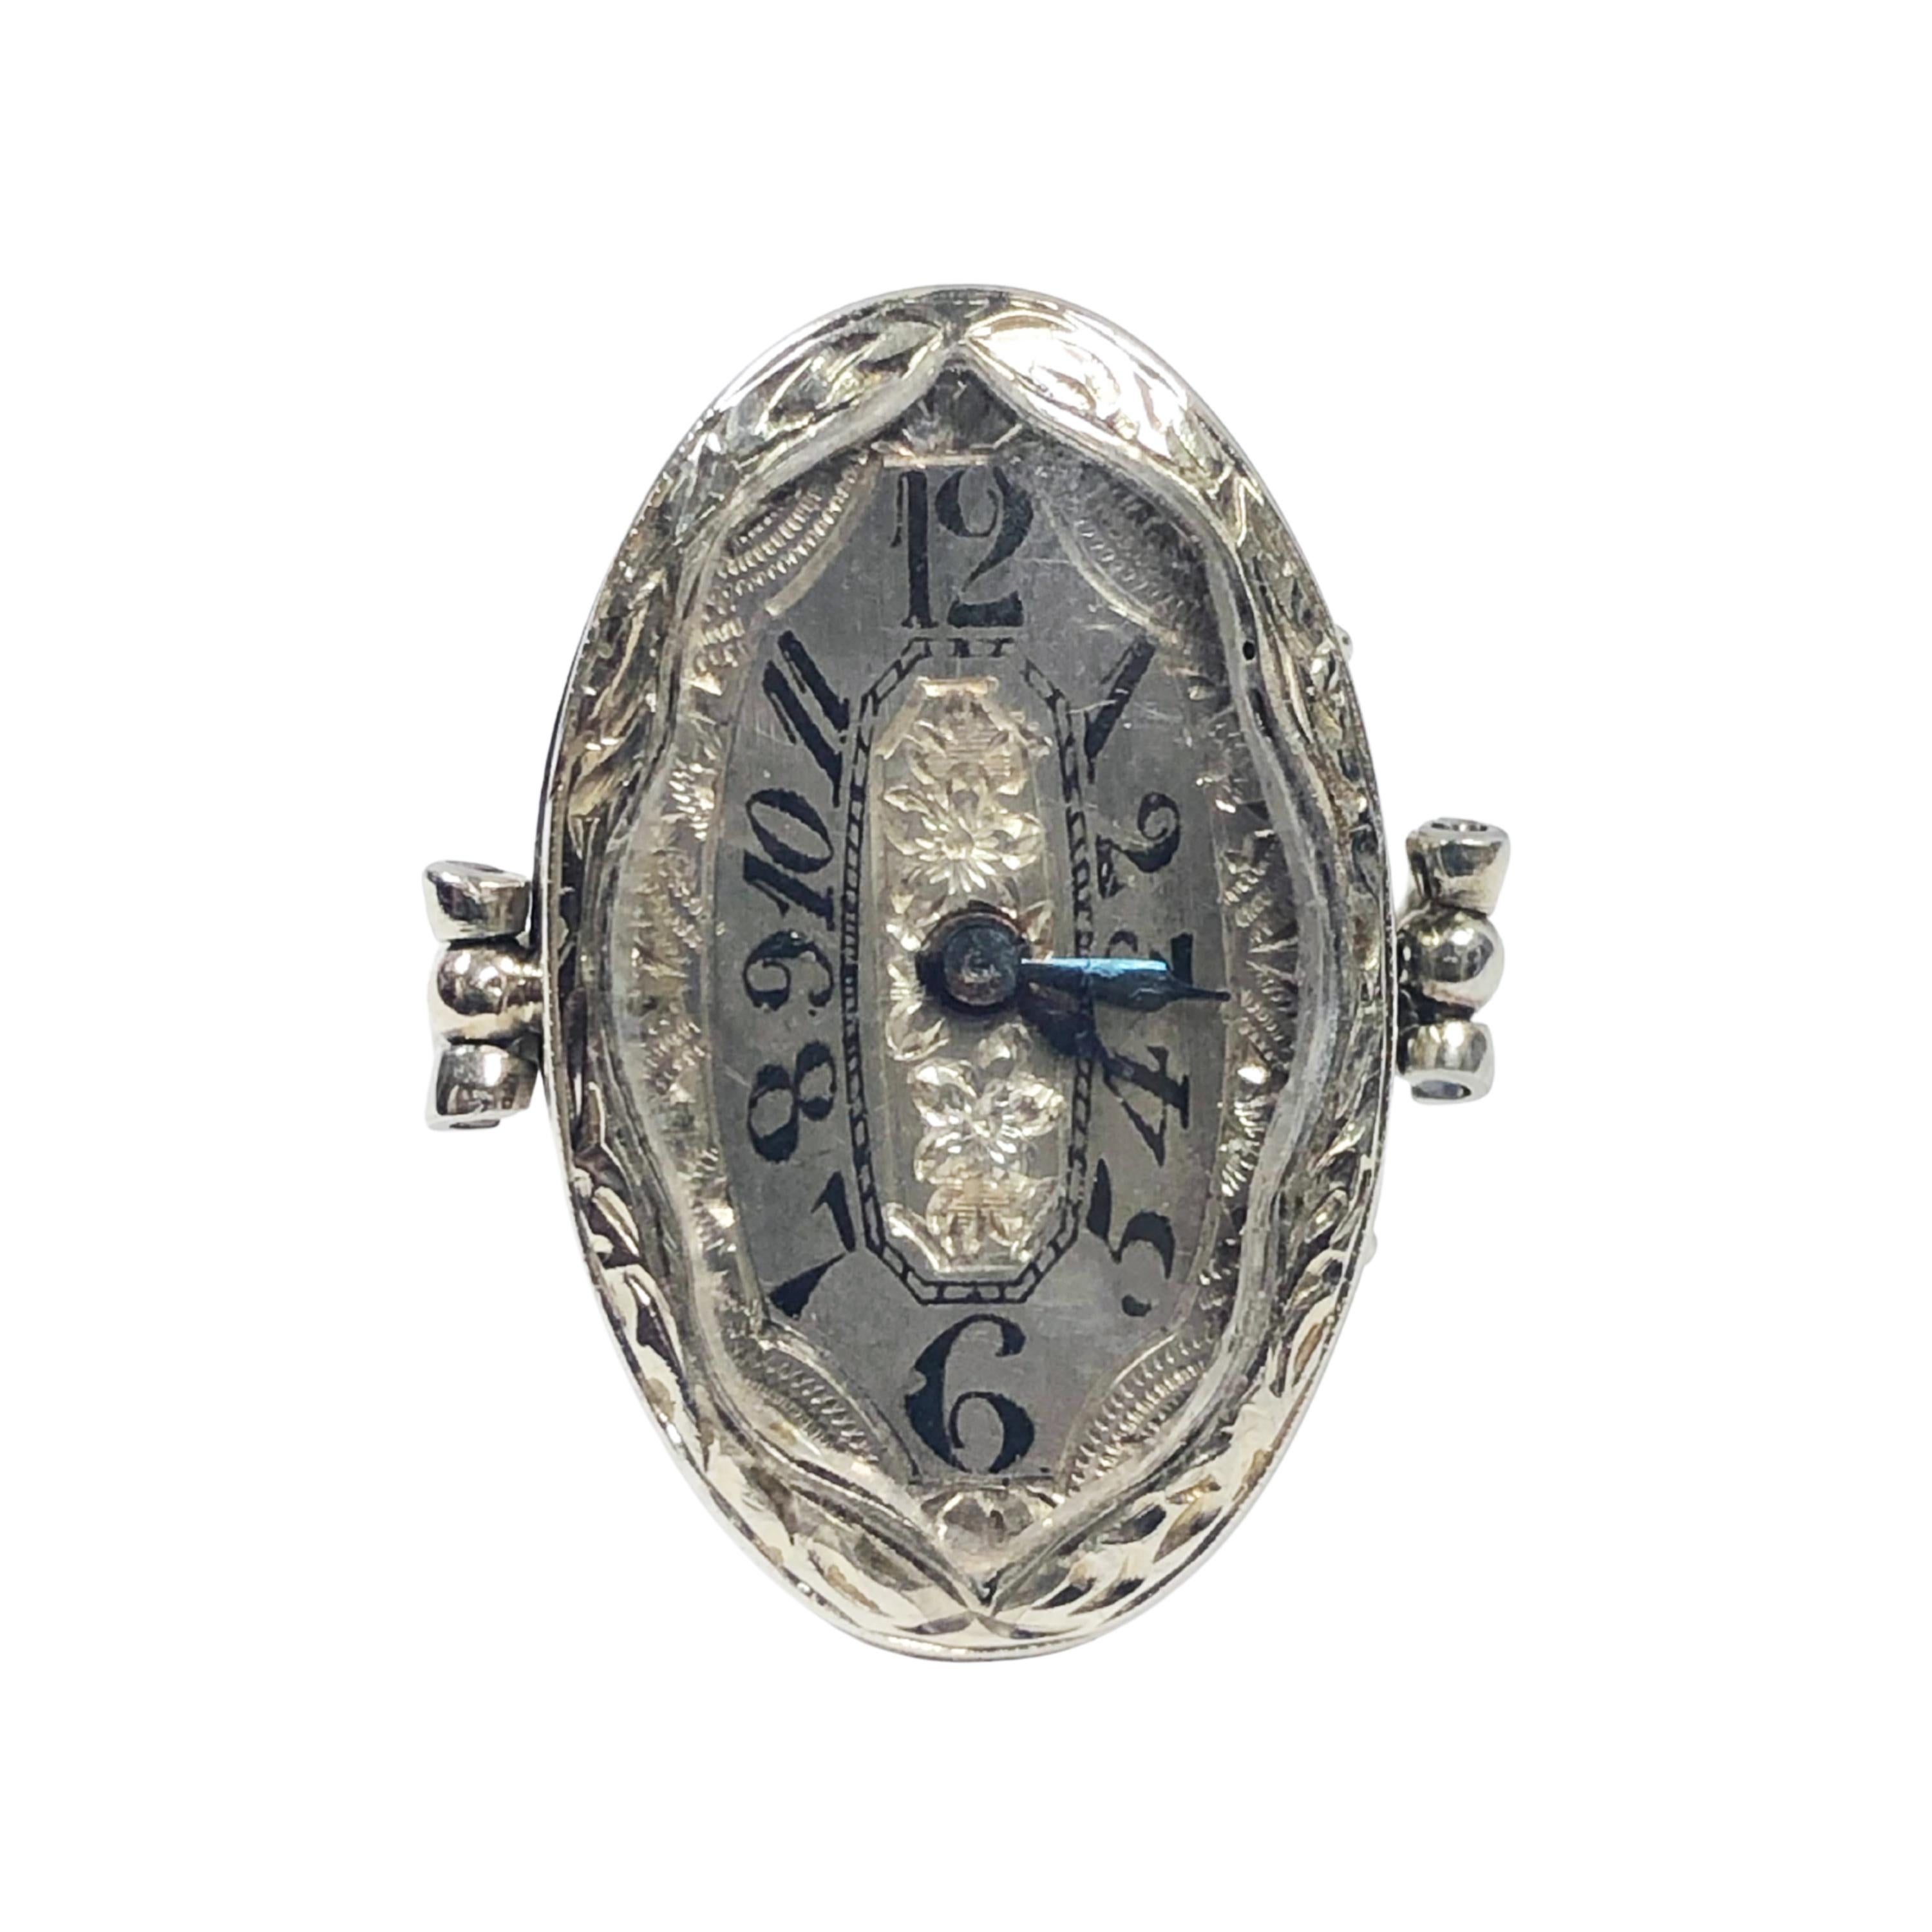 Circa 1920s Ring Watch, 14k White Gold with hand engraved design work, the oval top measures 7/8 X 9/16 inch. 17 jewel Fortis Mechanical, manual wind movement. silver dial with Black numerals and hand engraved design work. The watch is wound by a